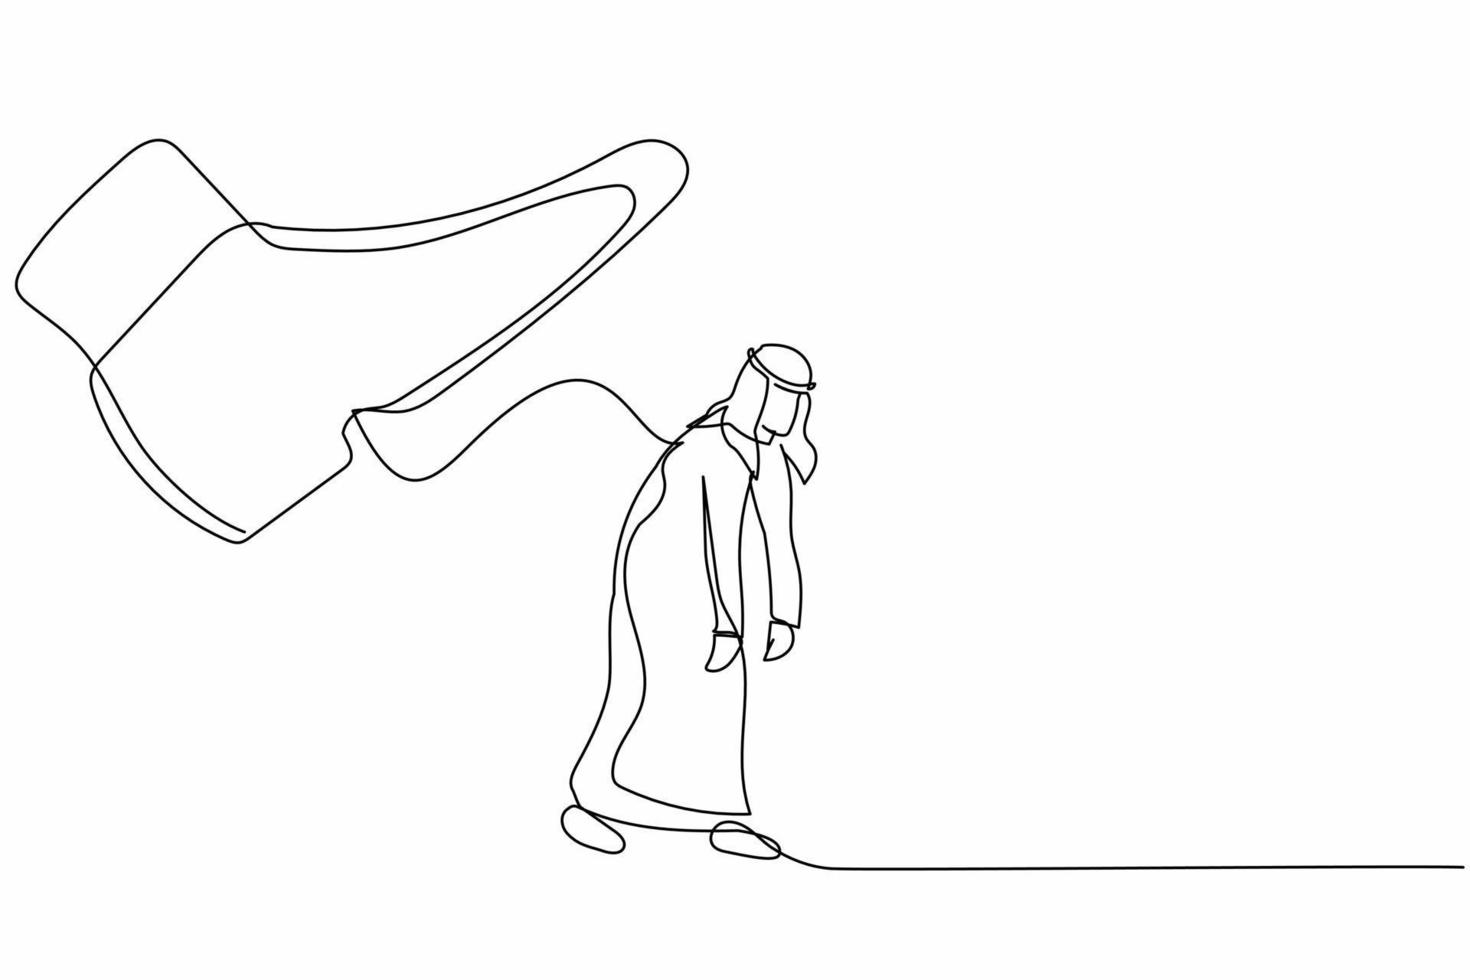 Single one line drawing sad Arabian businessman going away with huge boot shoe kicking him out. Male manager being fired and kicked out concept. Continuous line draw design graphic vector illustration